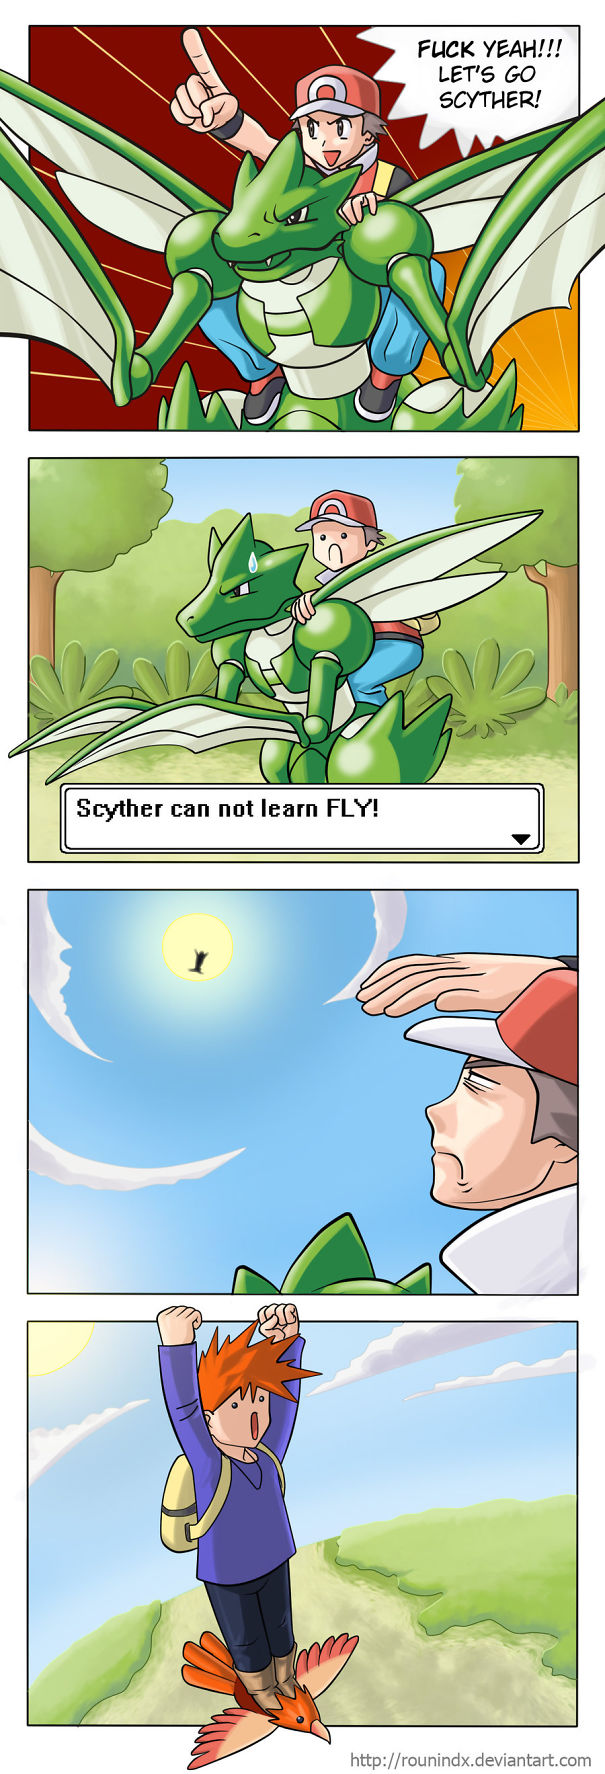 my_tribute___scyther_can_t_fly_by_rounindx-d2p0qyr-59af465d48842.jpg